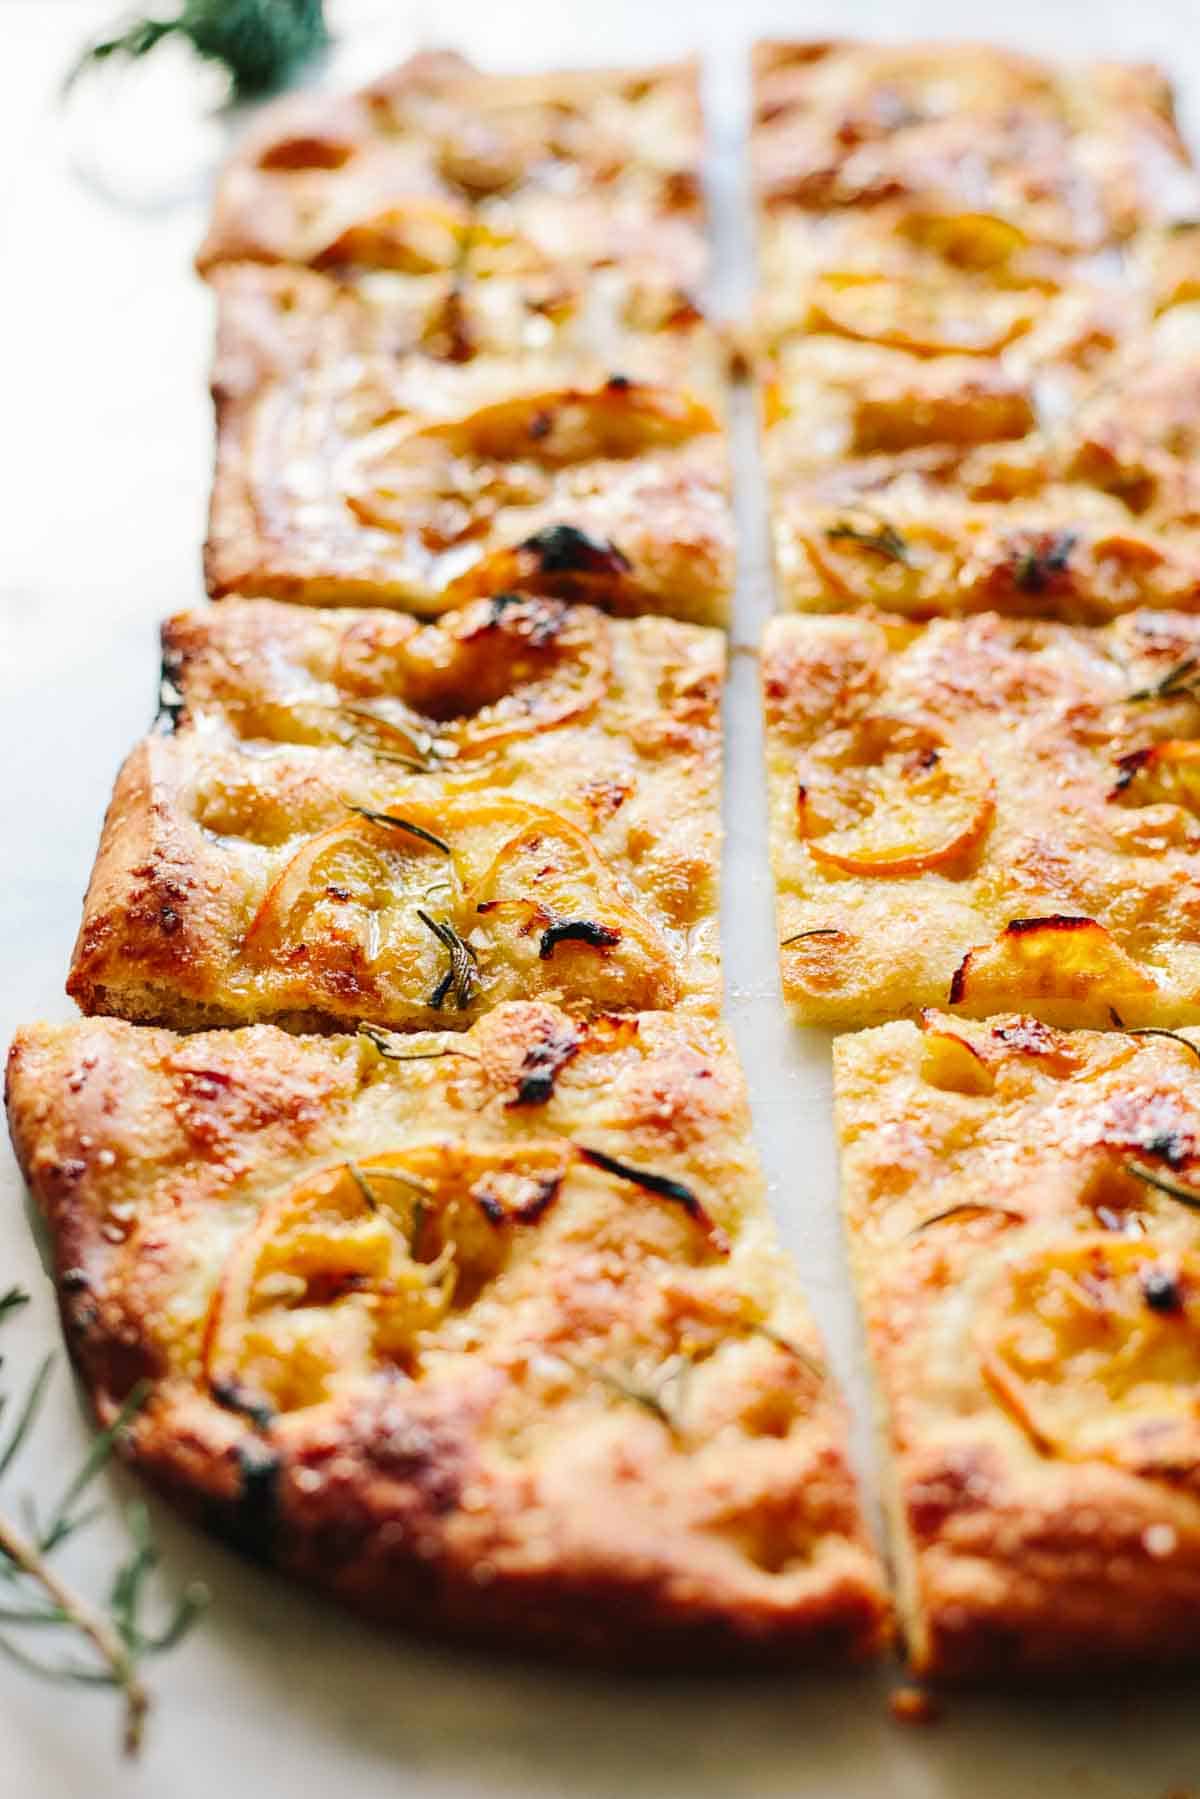 Slices of focaccia with lemon, herbs and sea salt on top.